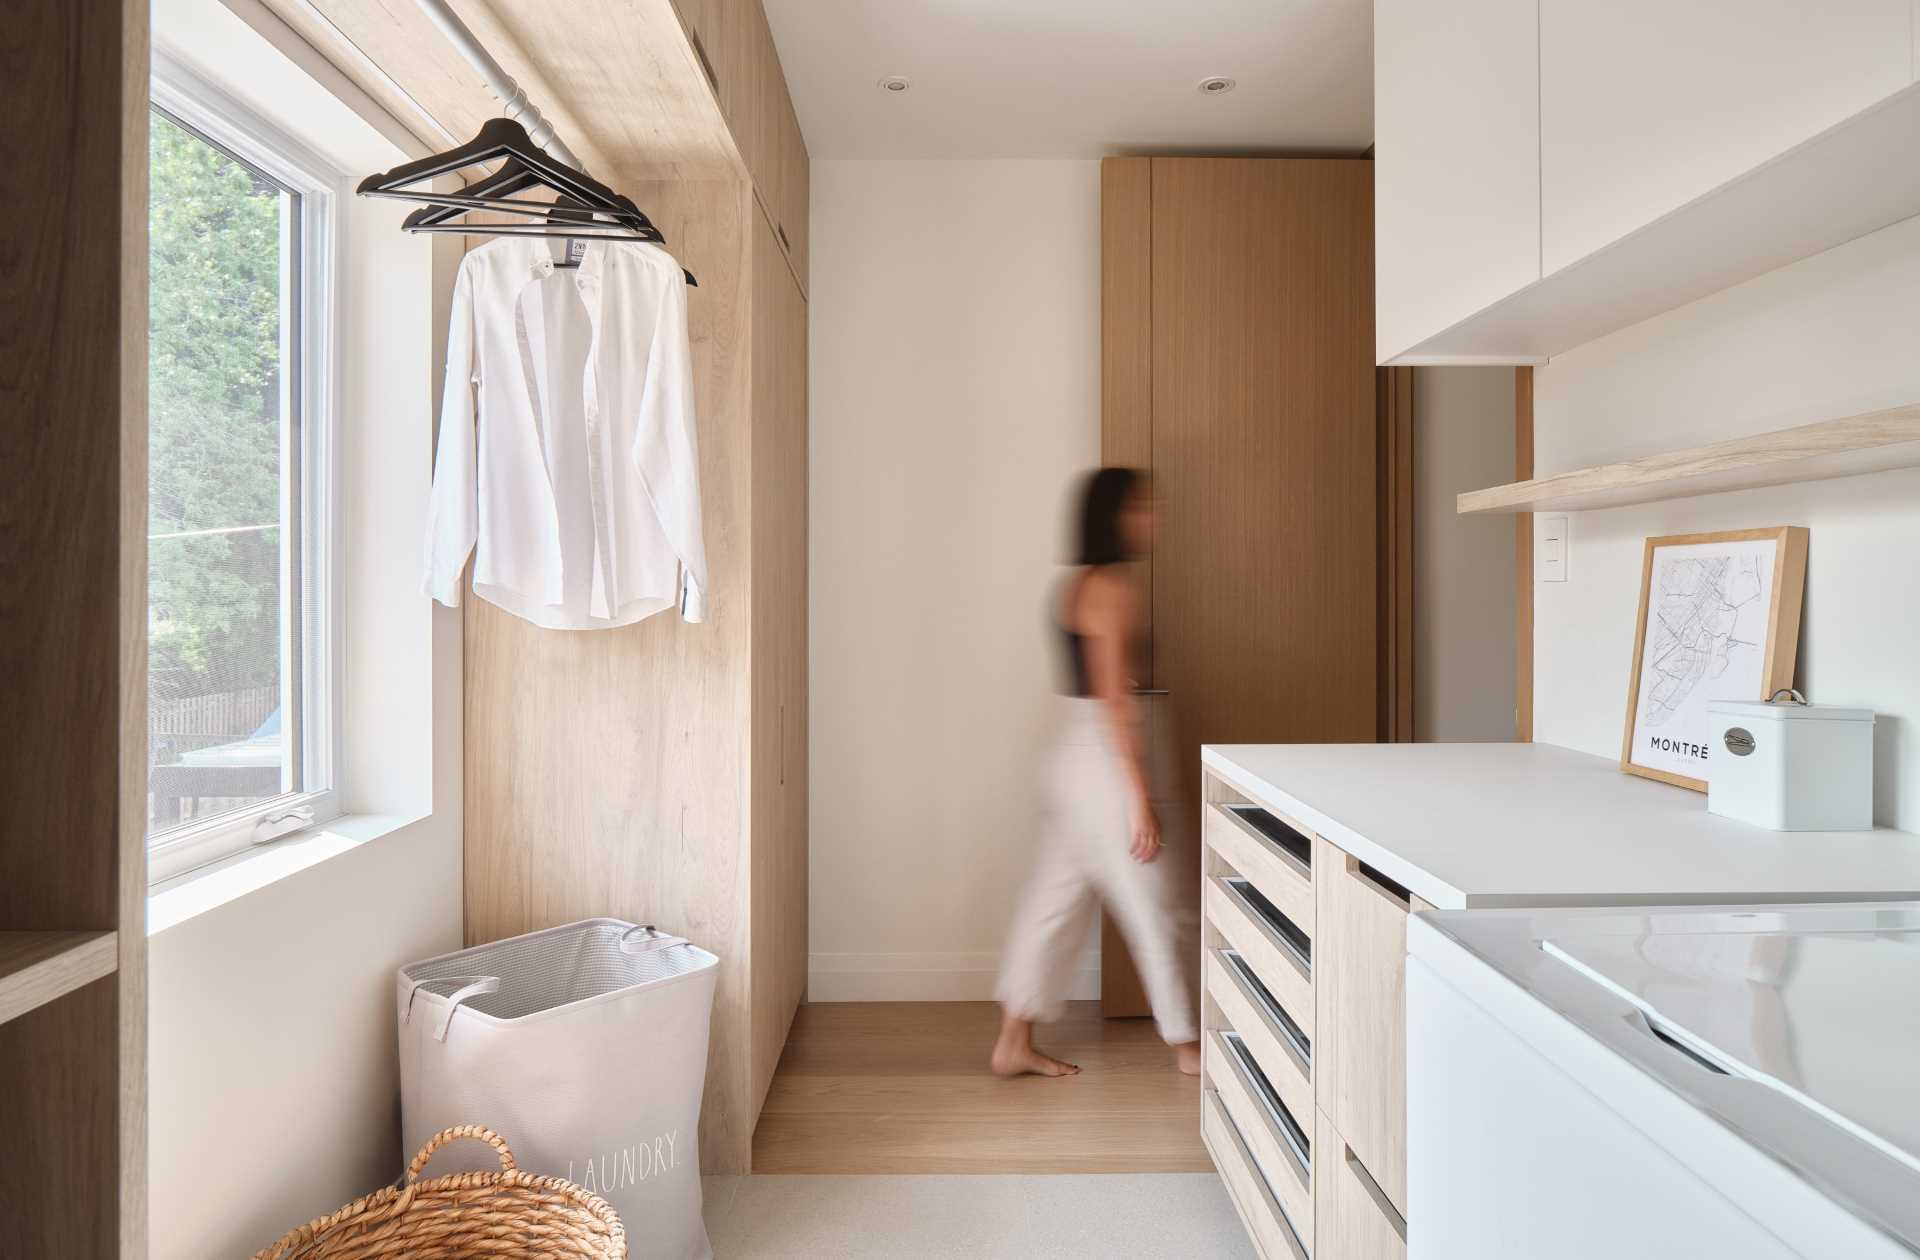 This modern laundry room includes cabinets and shelving that wrap around the window, with a clothing rod located in front of the window to dry clothes.